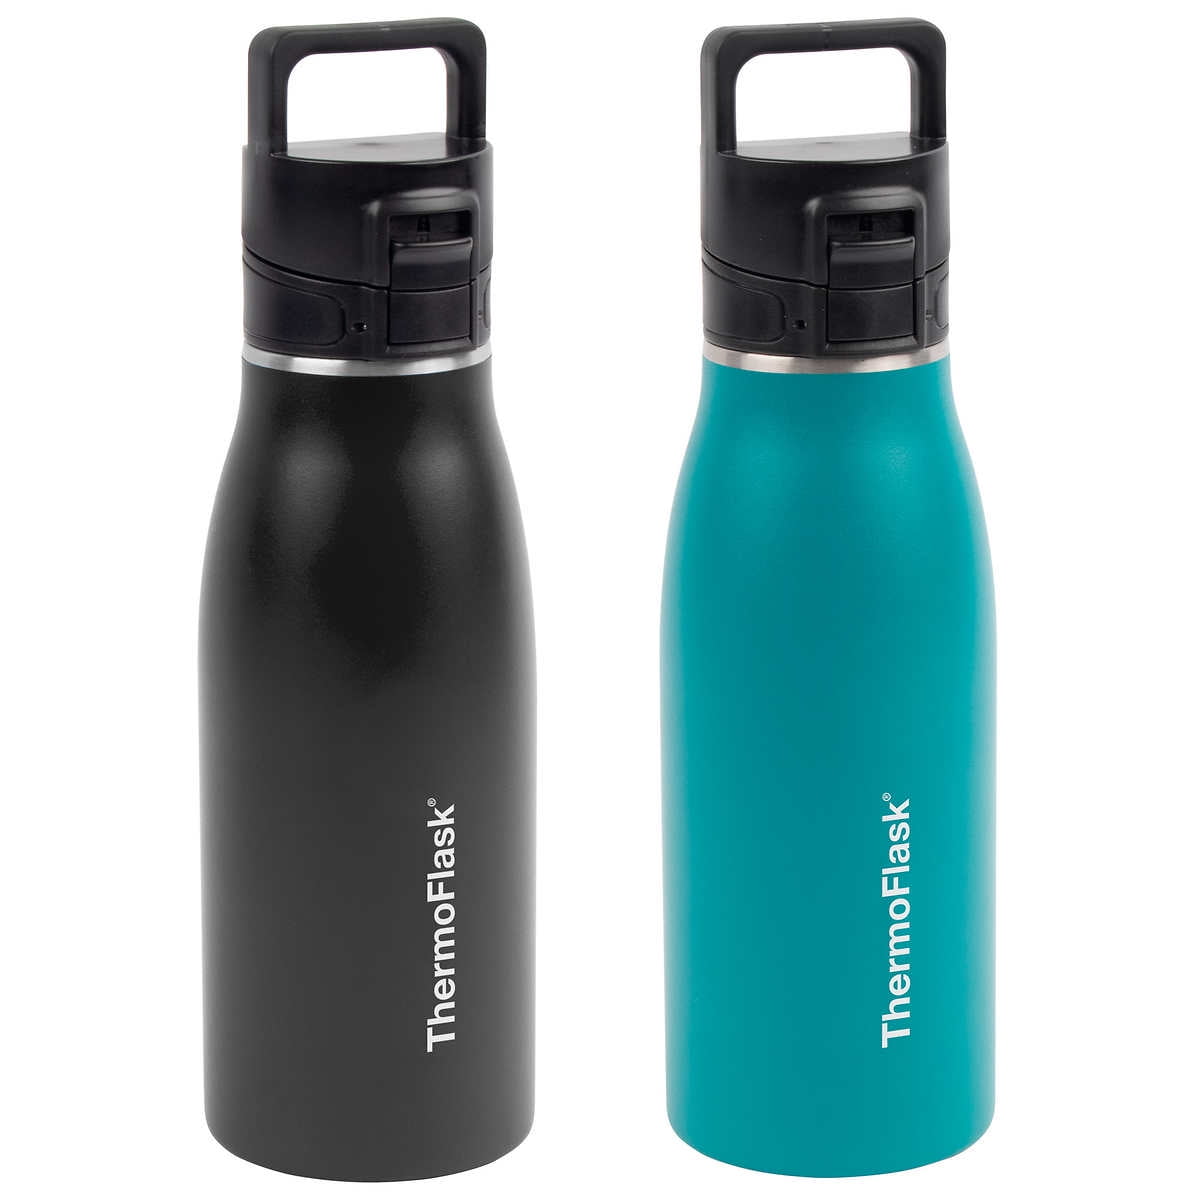 Thermoflask 24oz Stainless Steel Insulated Water Bottles, 2-Pack. Black And  Green - Drinkware